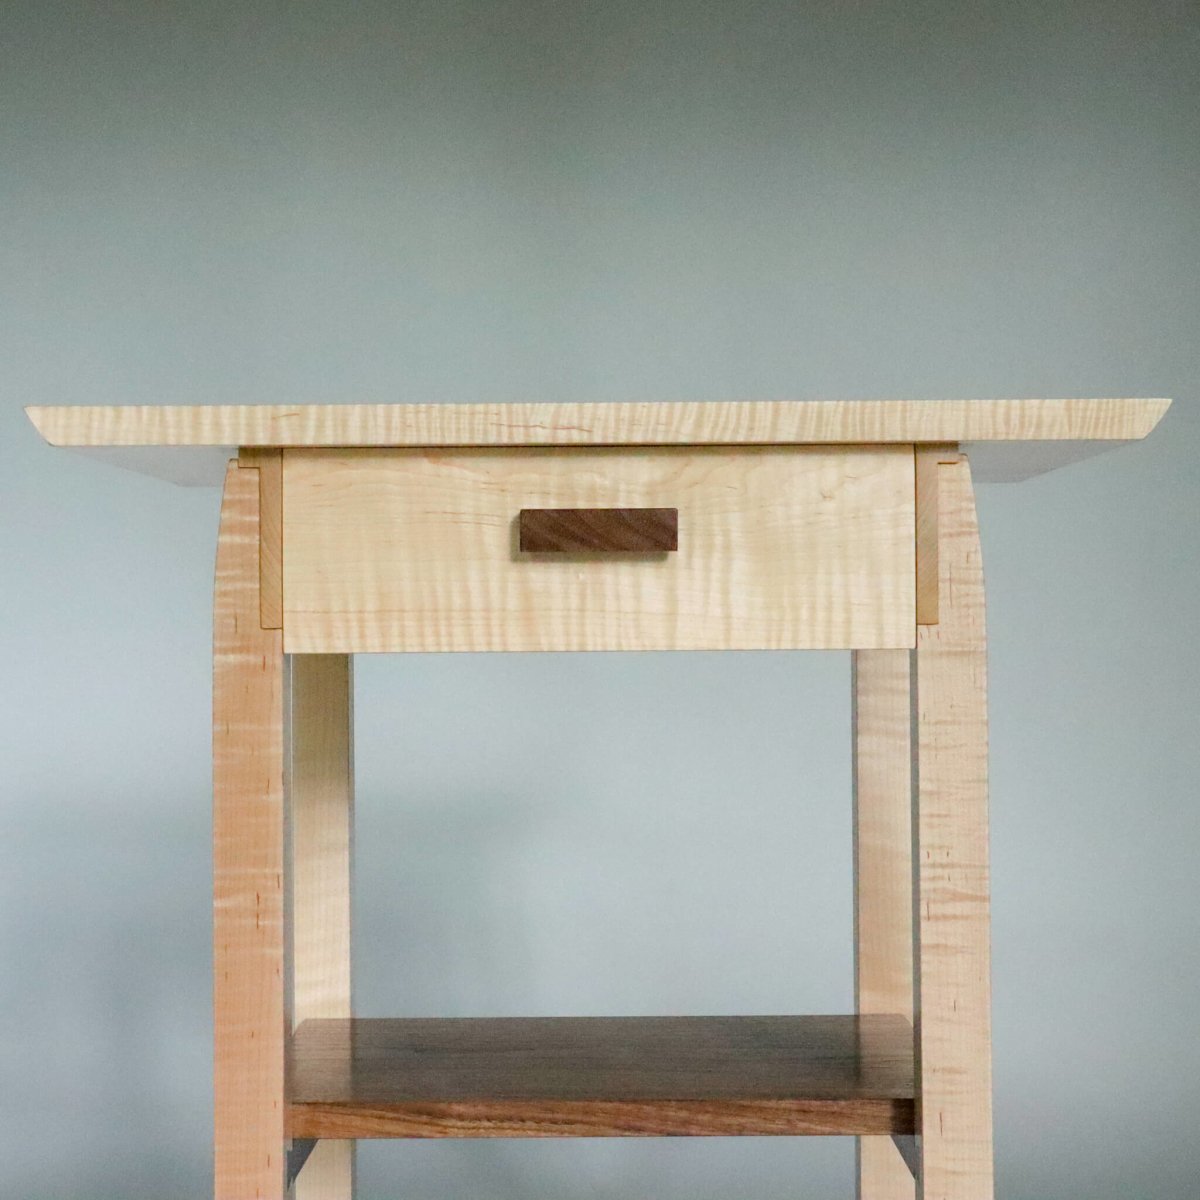 Japanese style table with drawer, tiger maple and walnut end table with drawer storage and display shelf by Mokuzai Furniture